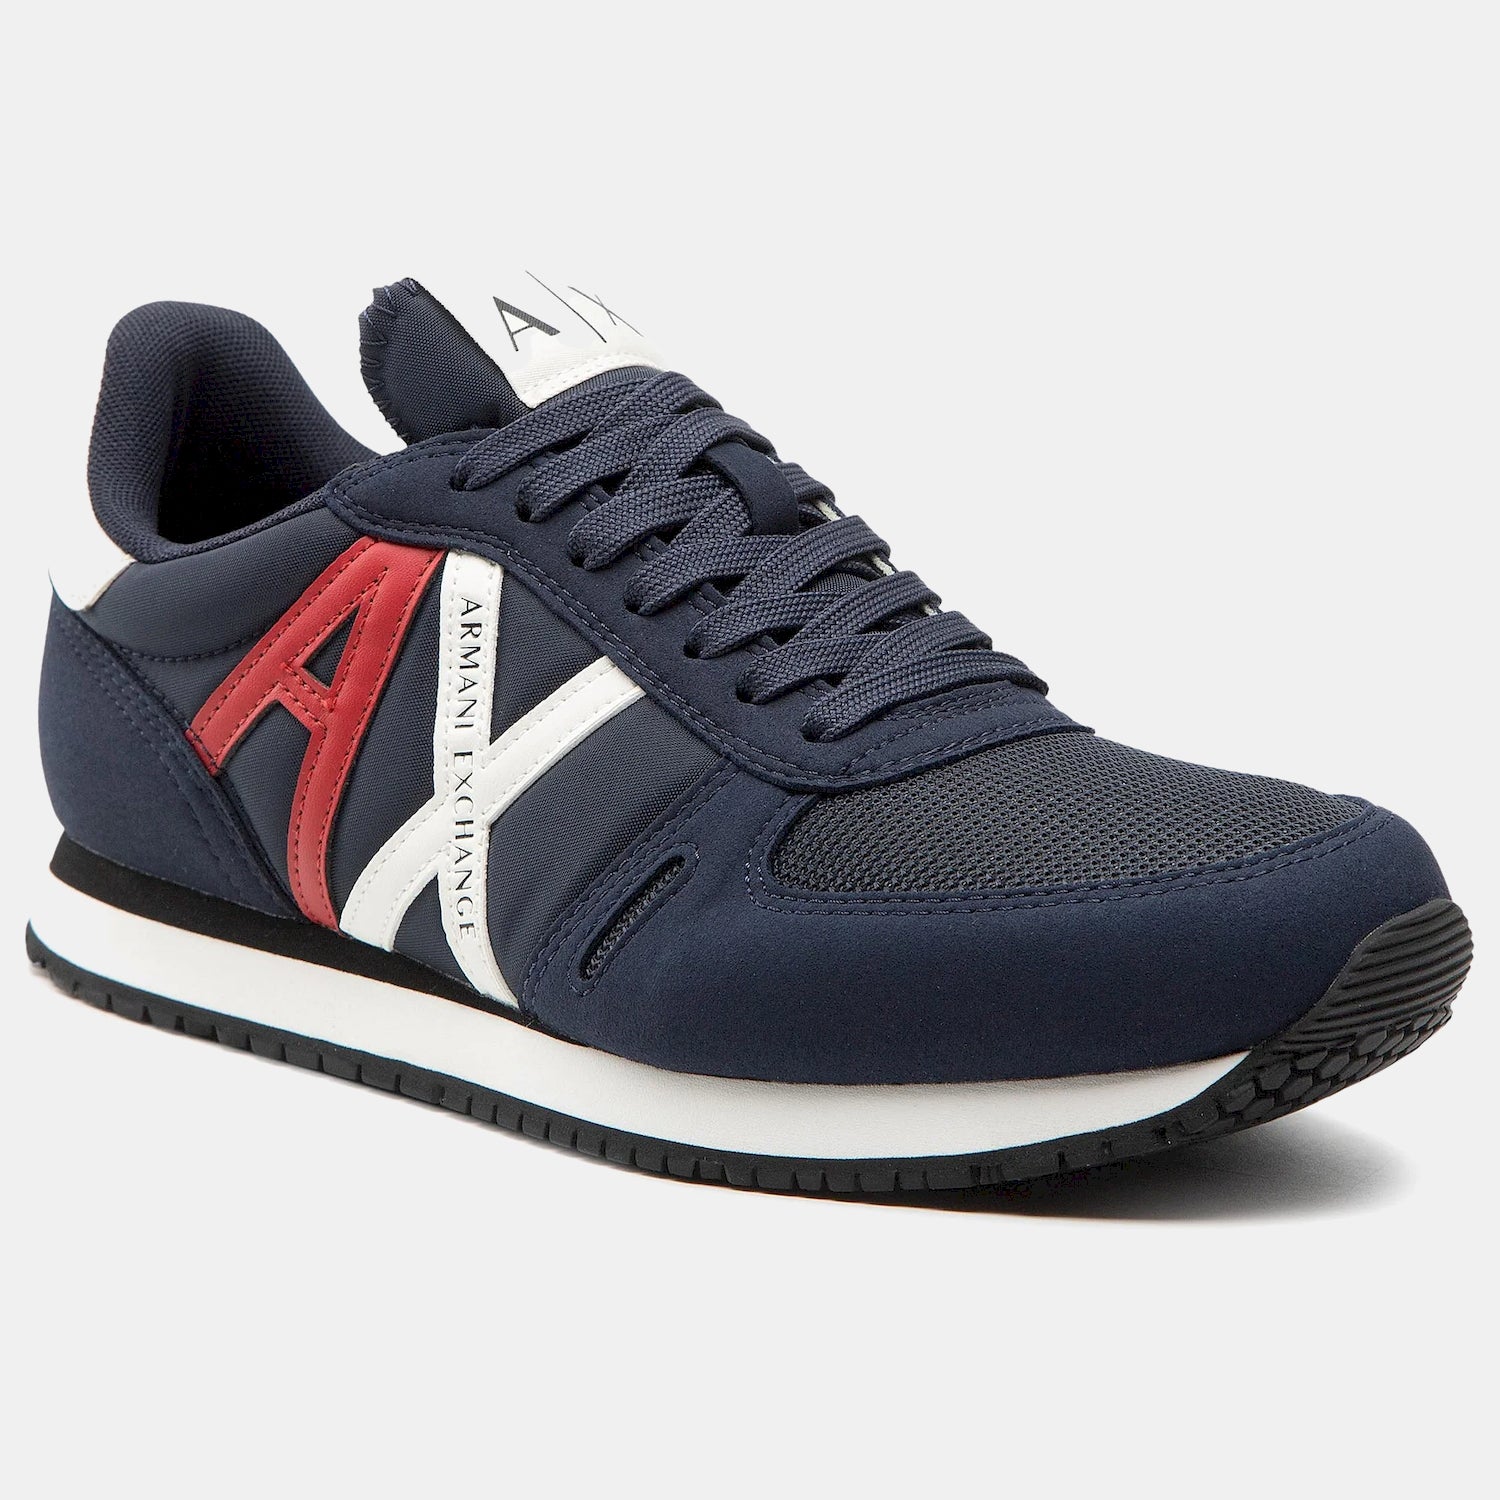 Armani Exchange Sapatilhas Sneakers Shoes Xux017 Xv028 Navy Red Navy Vermelho_shot5